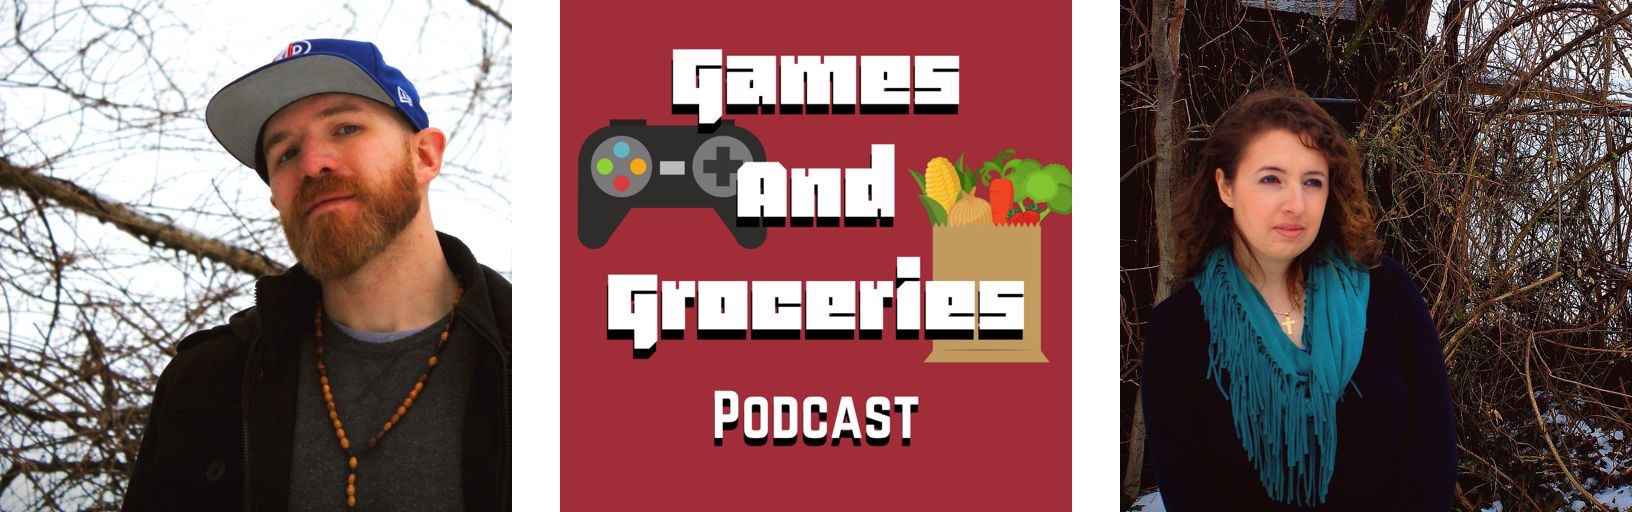 Adam and Liz, hosts of Games and Groceries